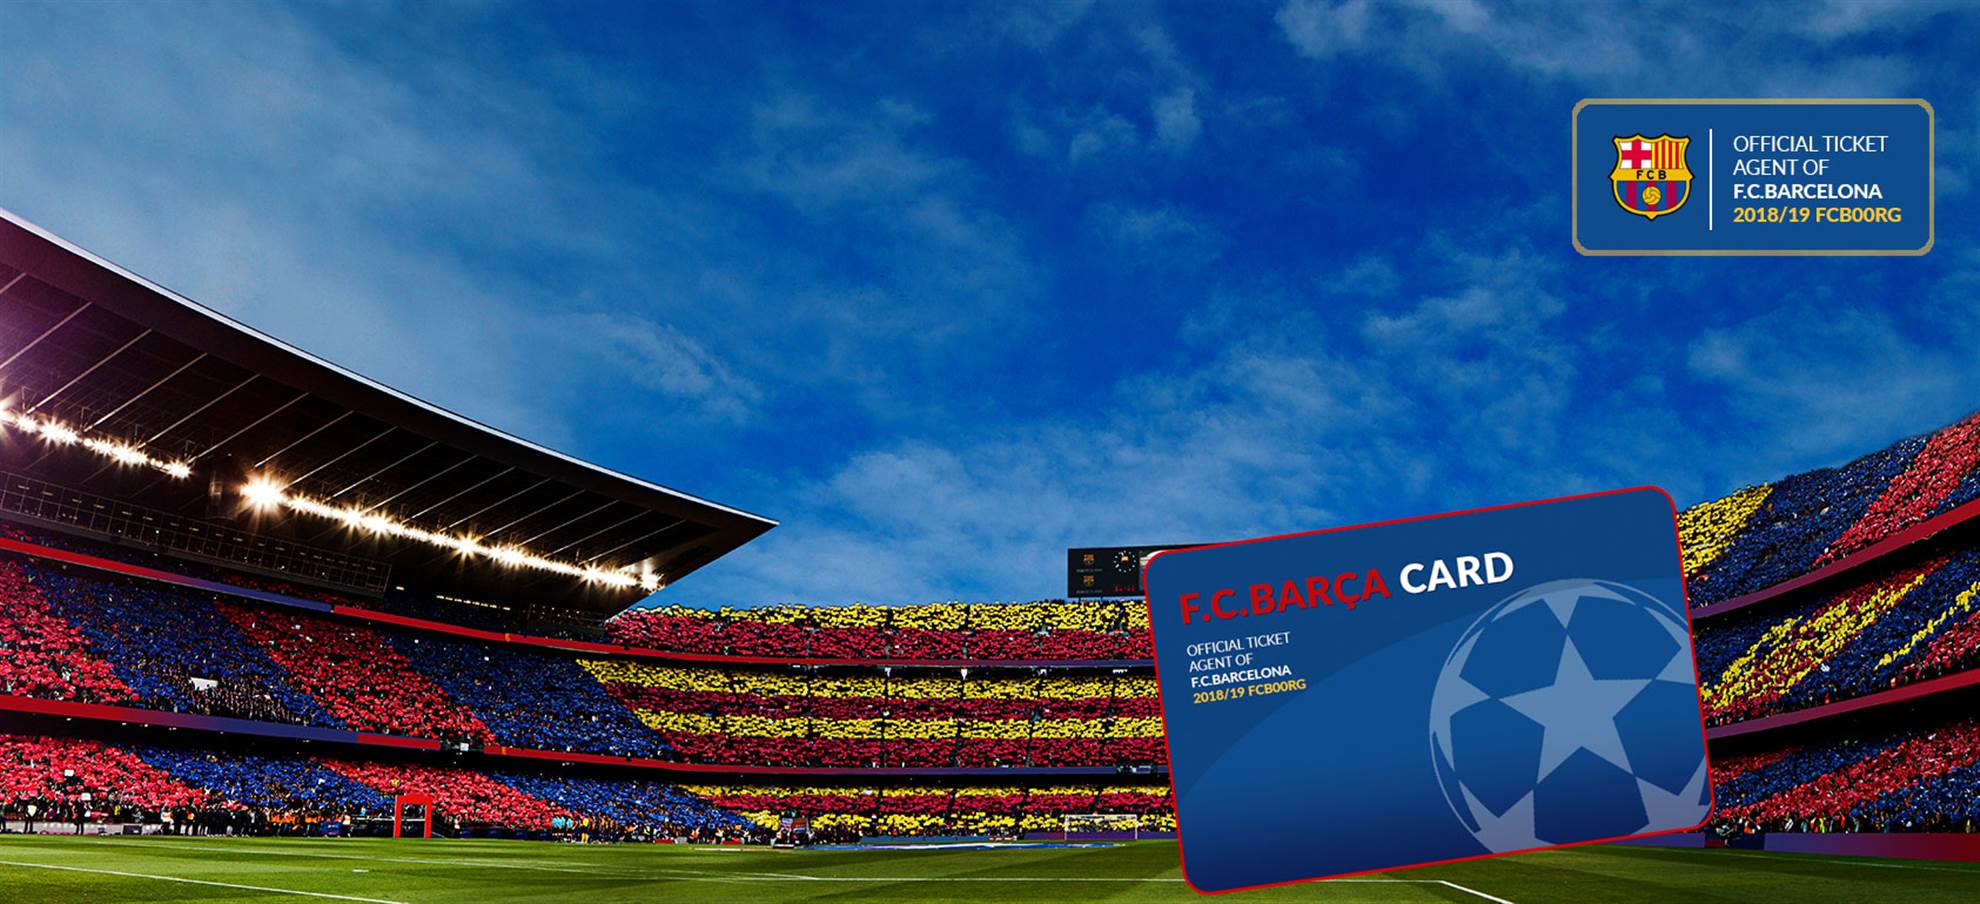 FC BARÇA CARD ´A perfect holiday day out at Camp Nou´